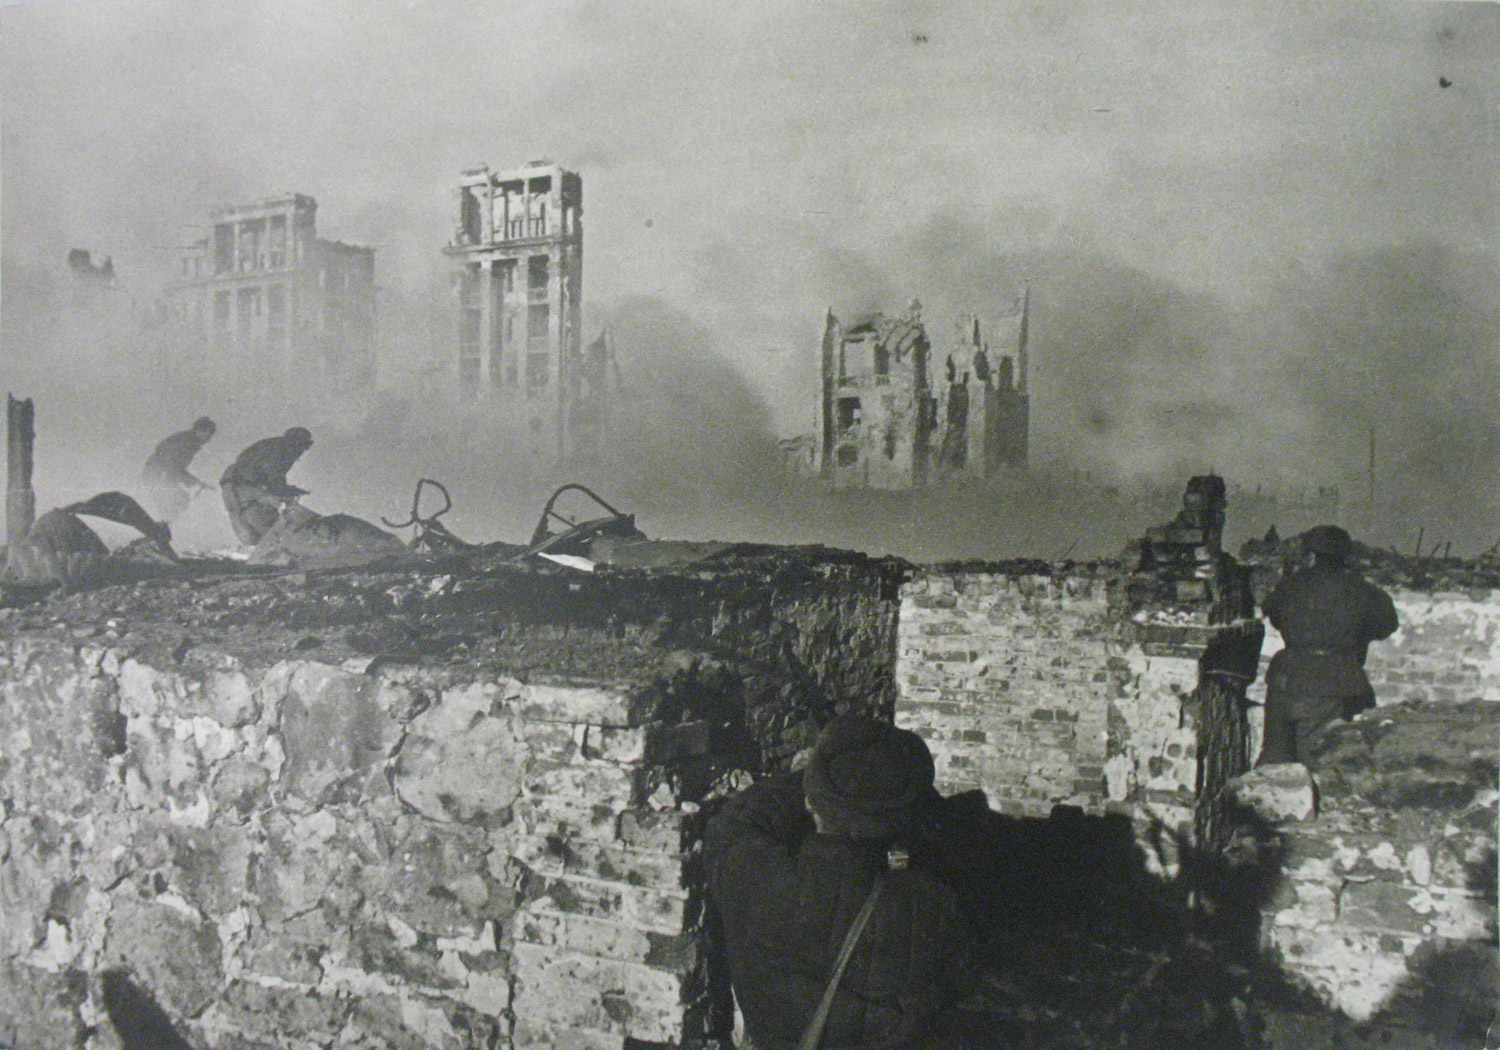 Image: Attack on Building by the 13th Radishchev Division, Stalingrad, 1942